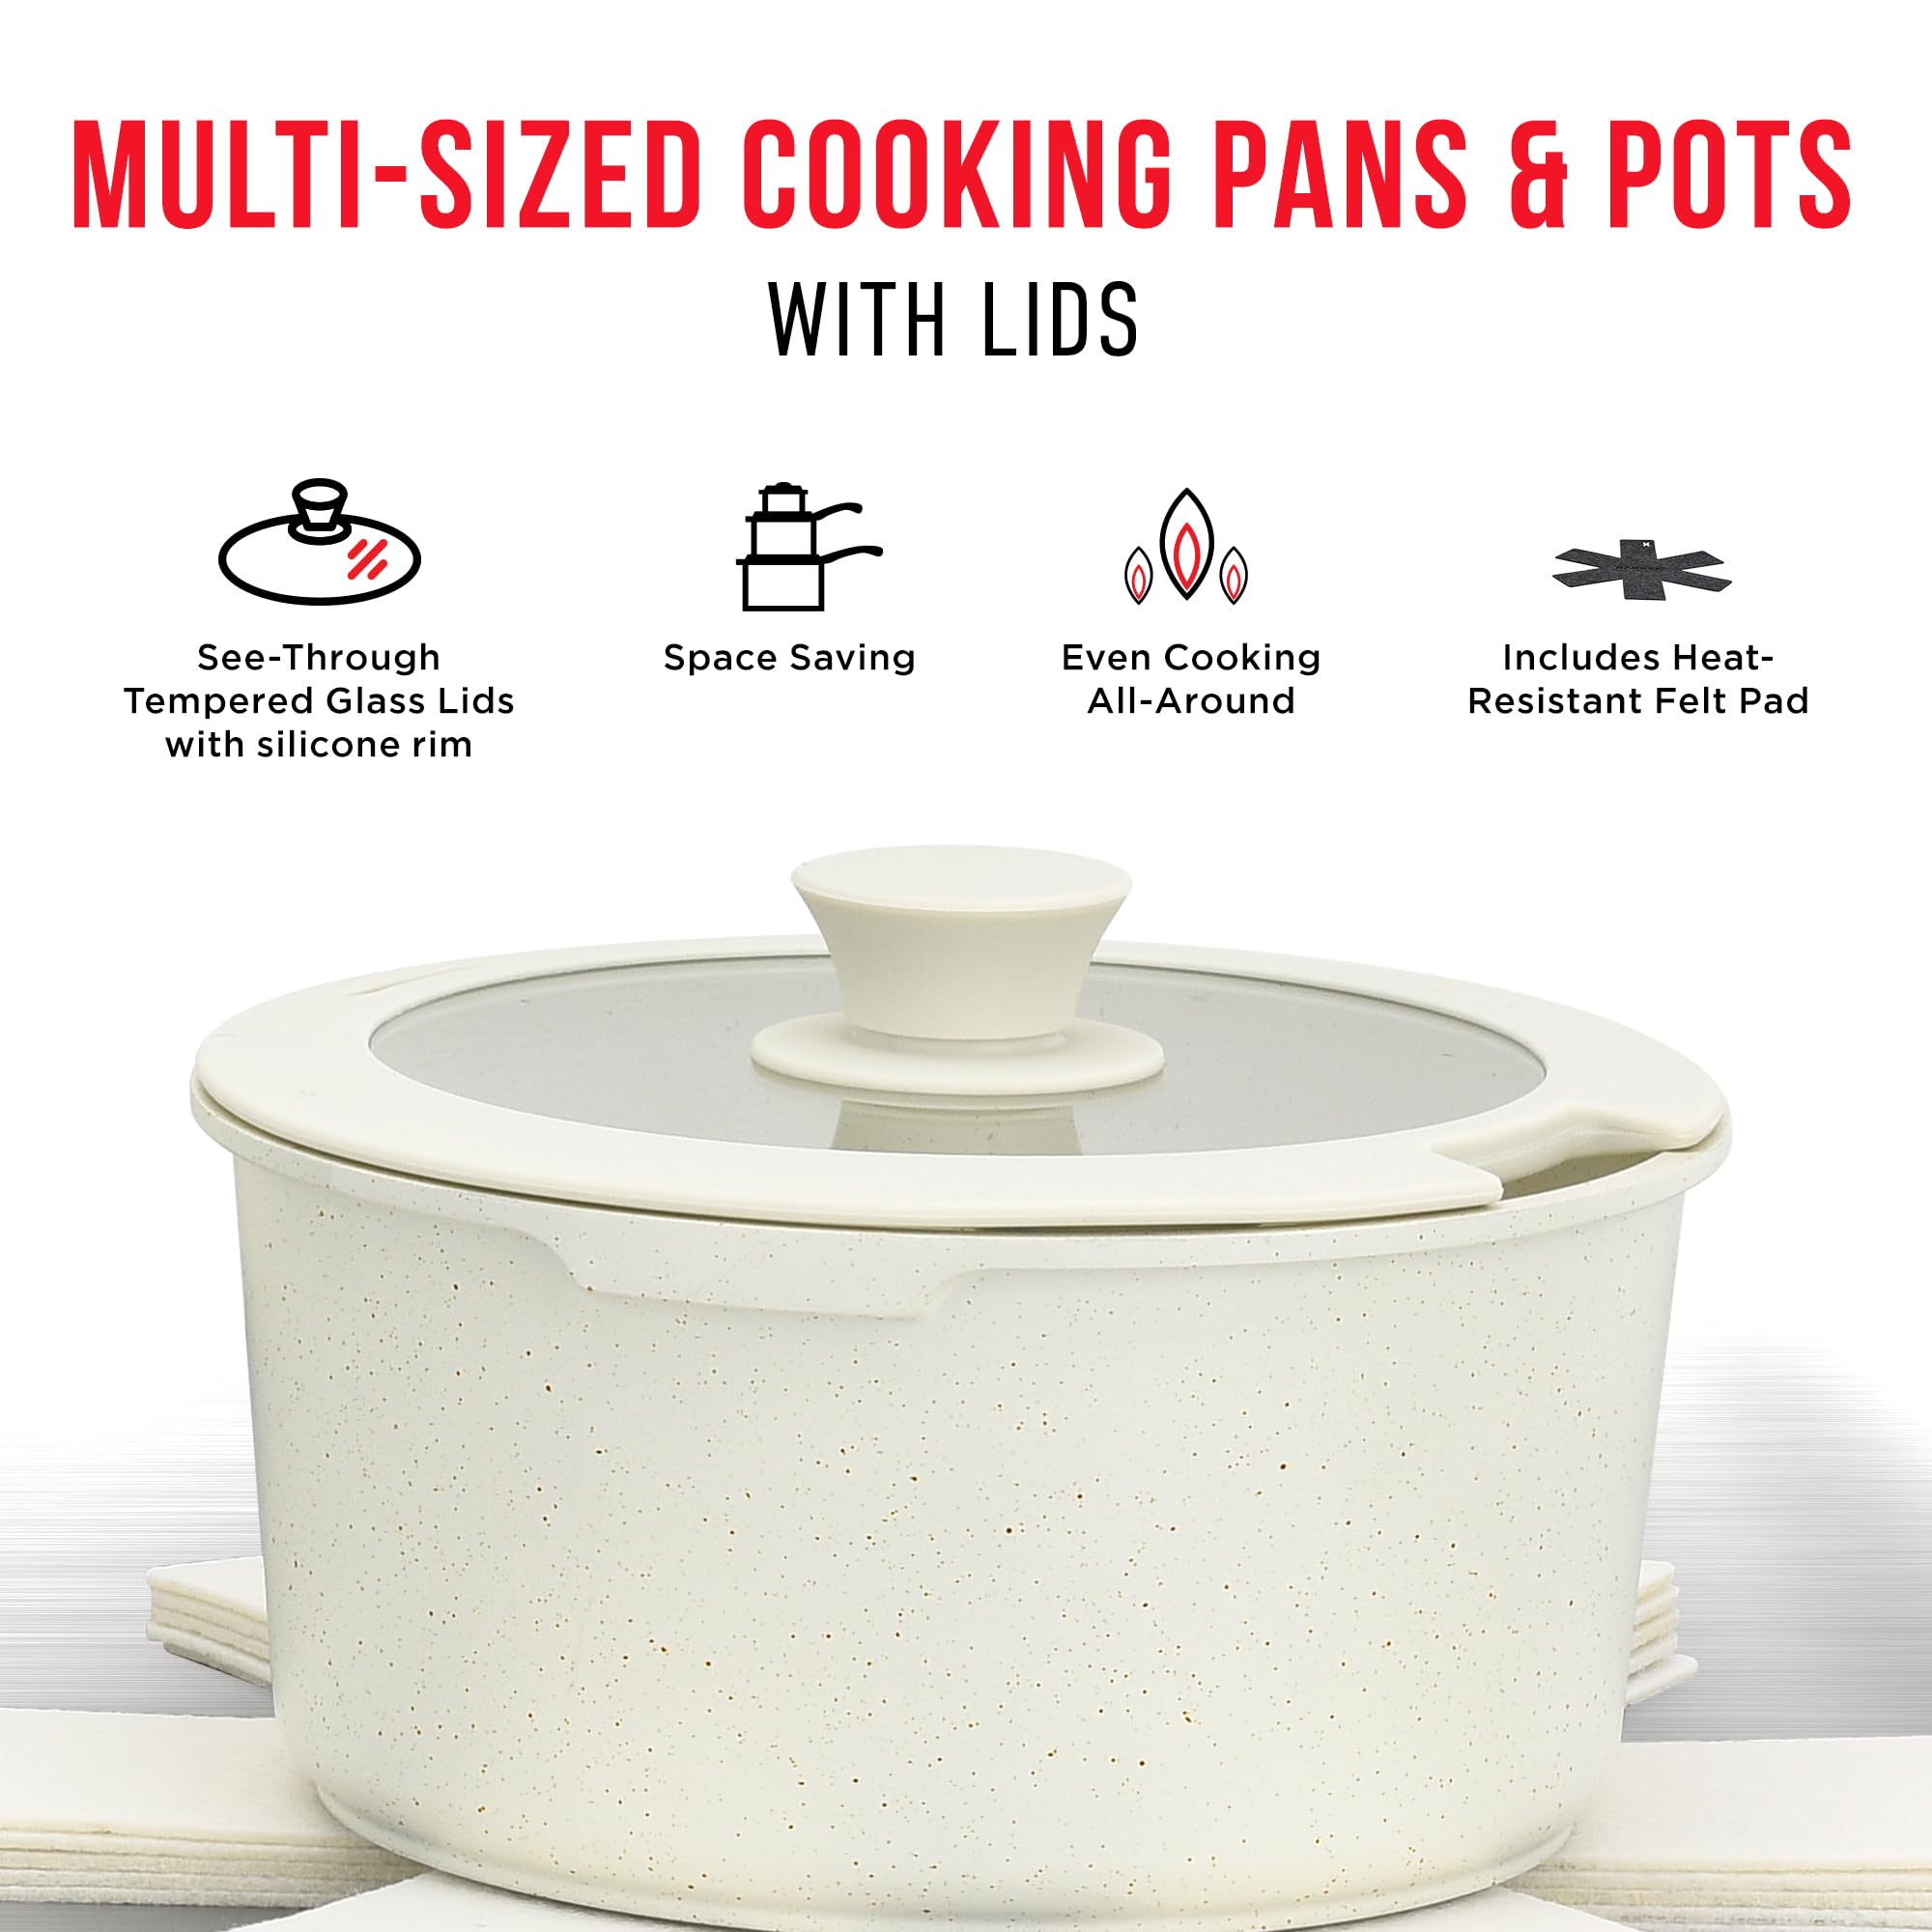 Bakken-Swiss Detachable 15-Piece Cookware Set – Granite Non-Stick – Eco-Friendly – stackable Removable Handles – for All Stoves & Oven-Safe - Cream Marble coating